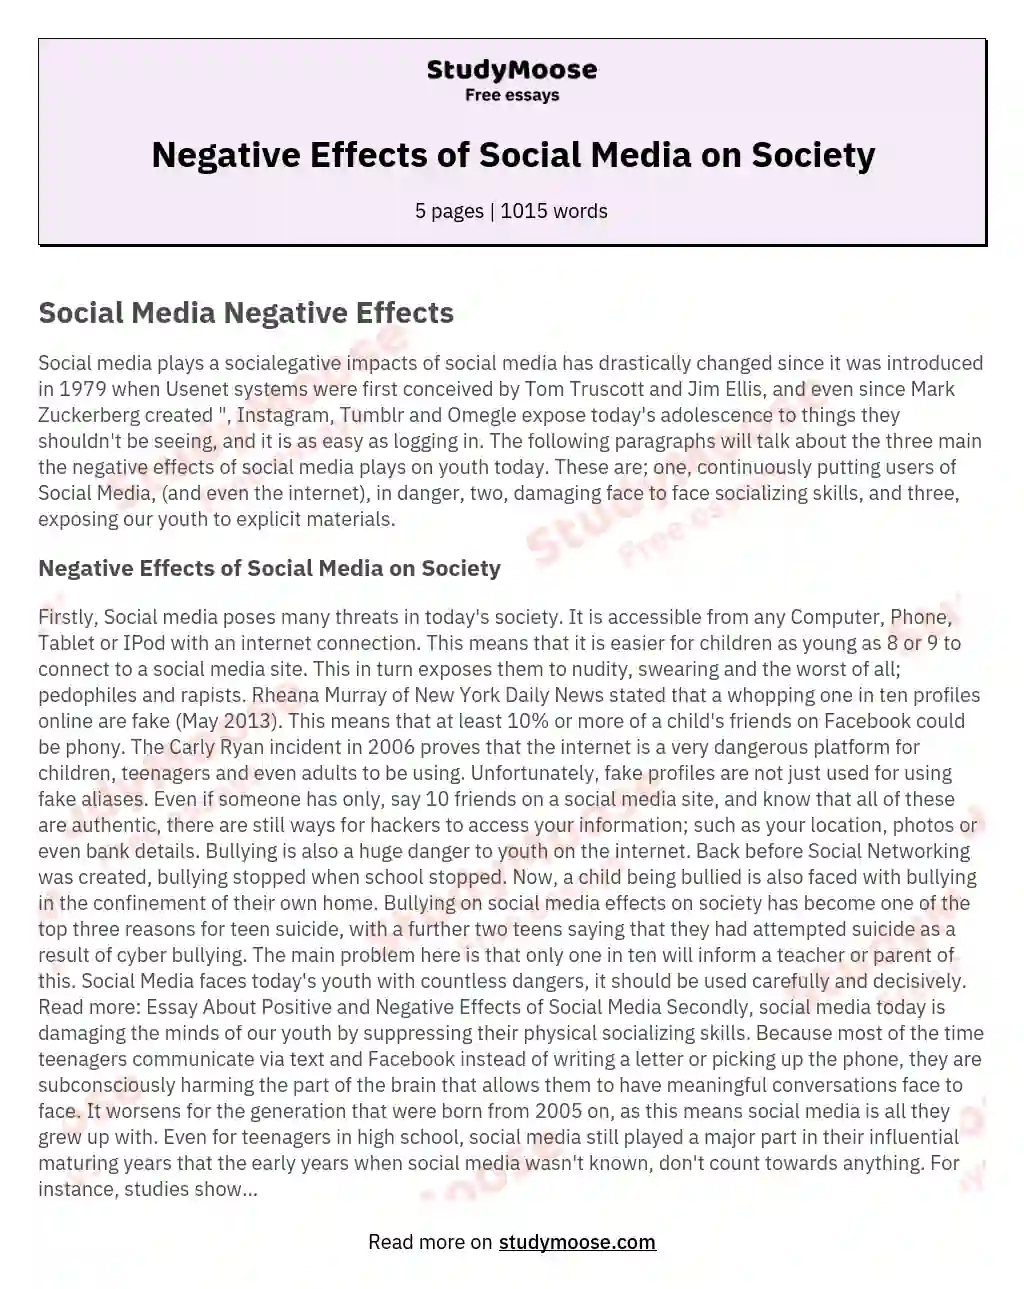 Negative Effects of Social Media on Society